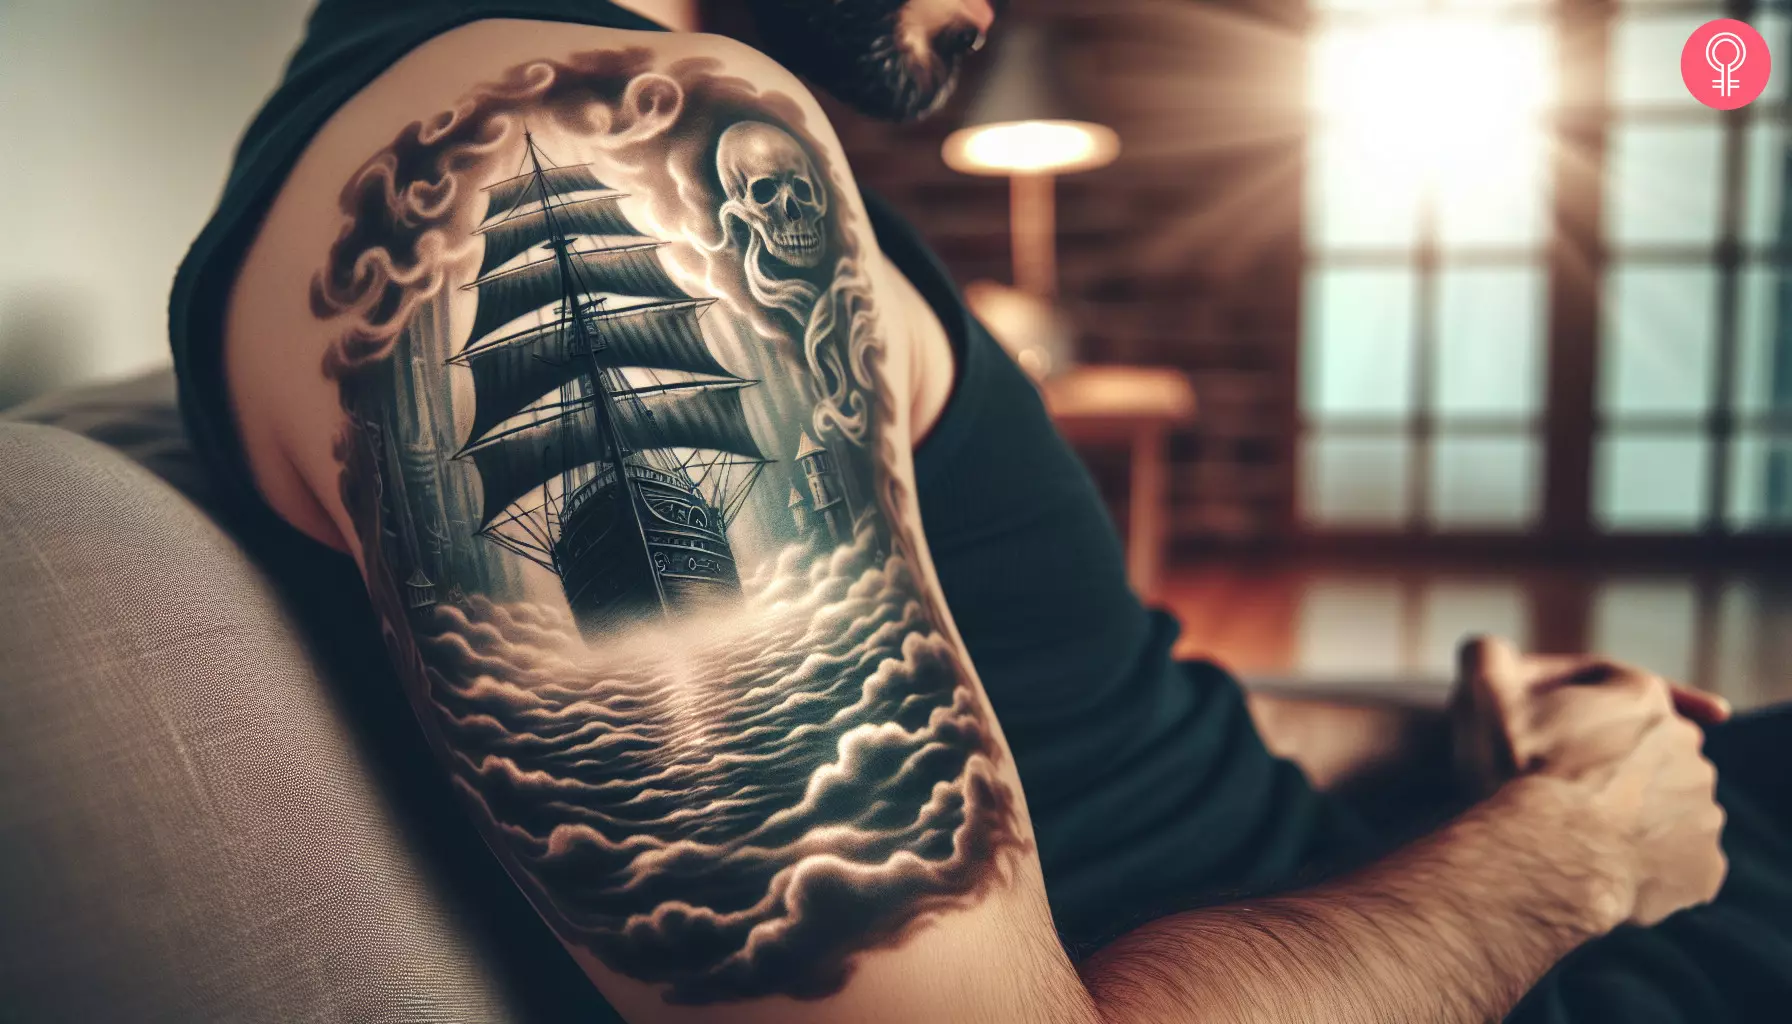 A ghost ship tattoo on the upper arm